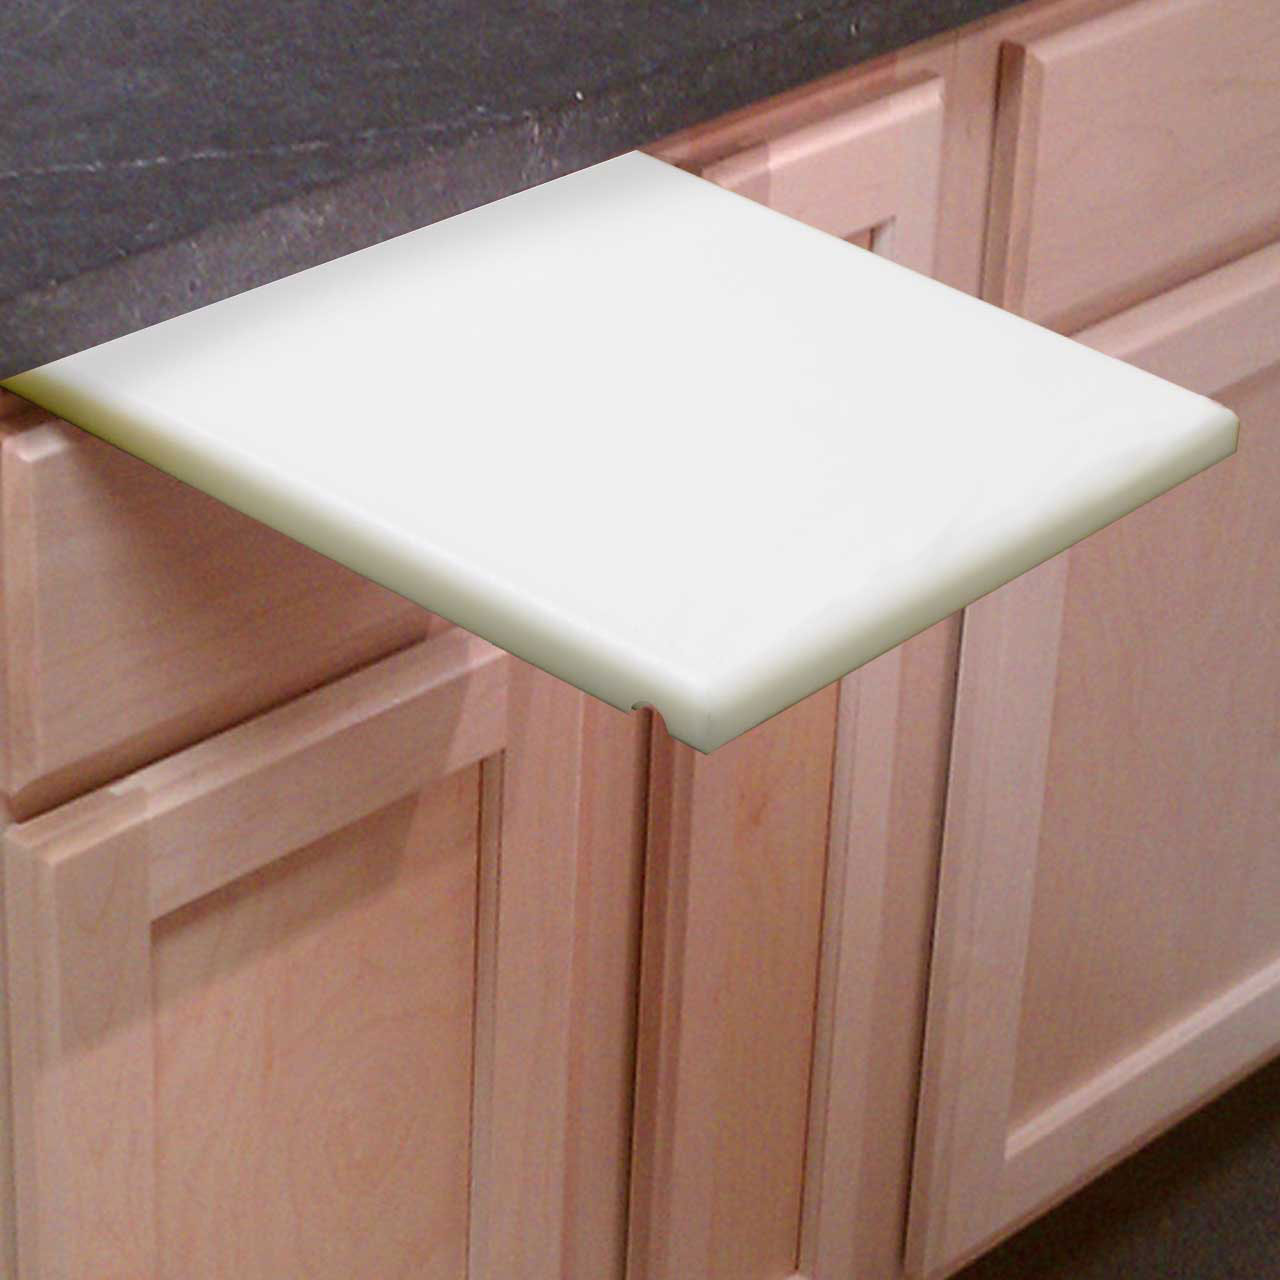  1/2 White Poly Cutting Board - A Cut Above the Rest!